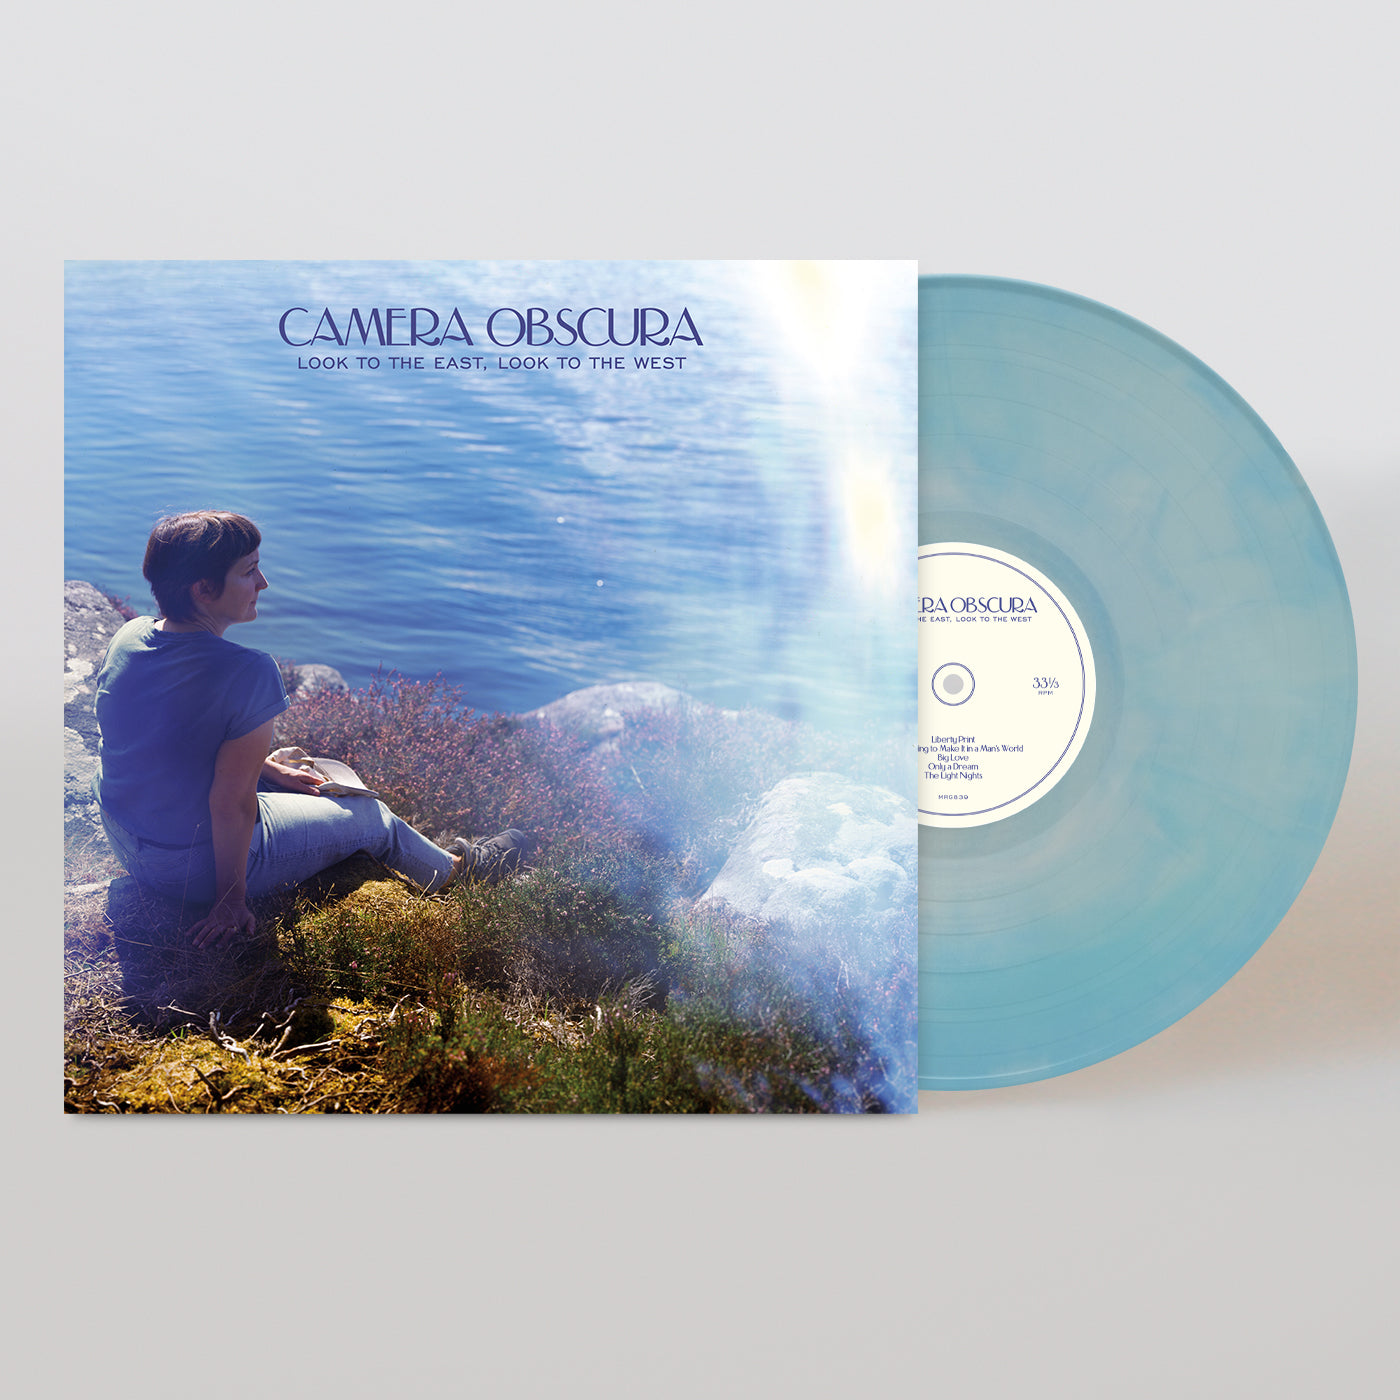 CAMERA OBSCURA - LOOK TO THE EAST, LOOK TO THE WEST Vinyl LP